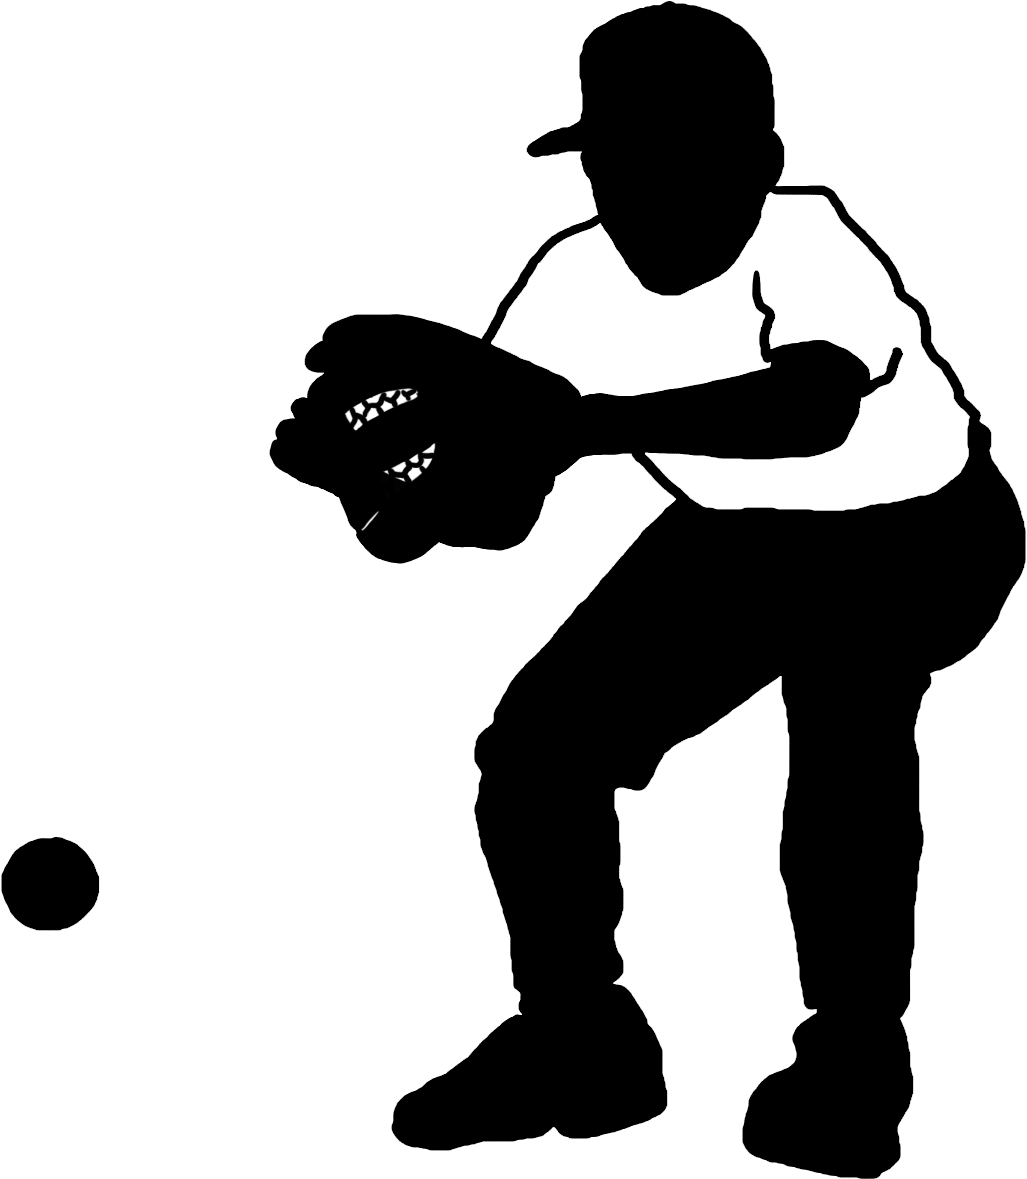 Black Silhouette Of Young Baseball Player, Black White - Baseball Player Silhouette Png (1254x1317)